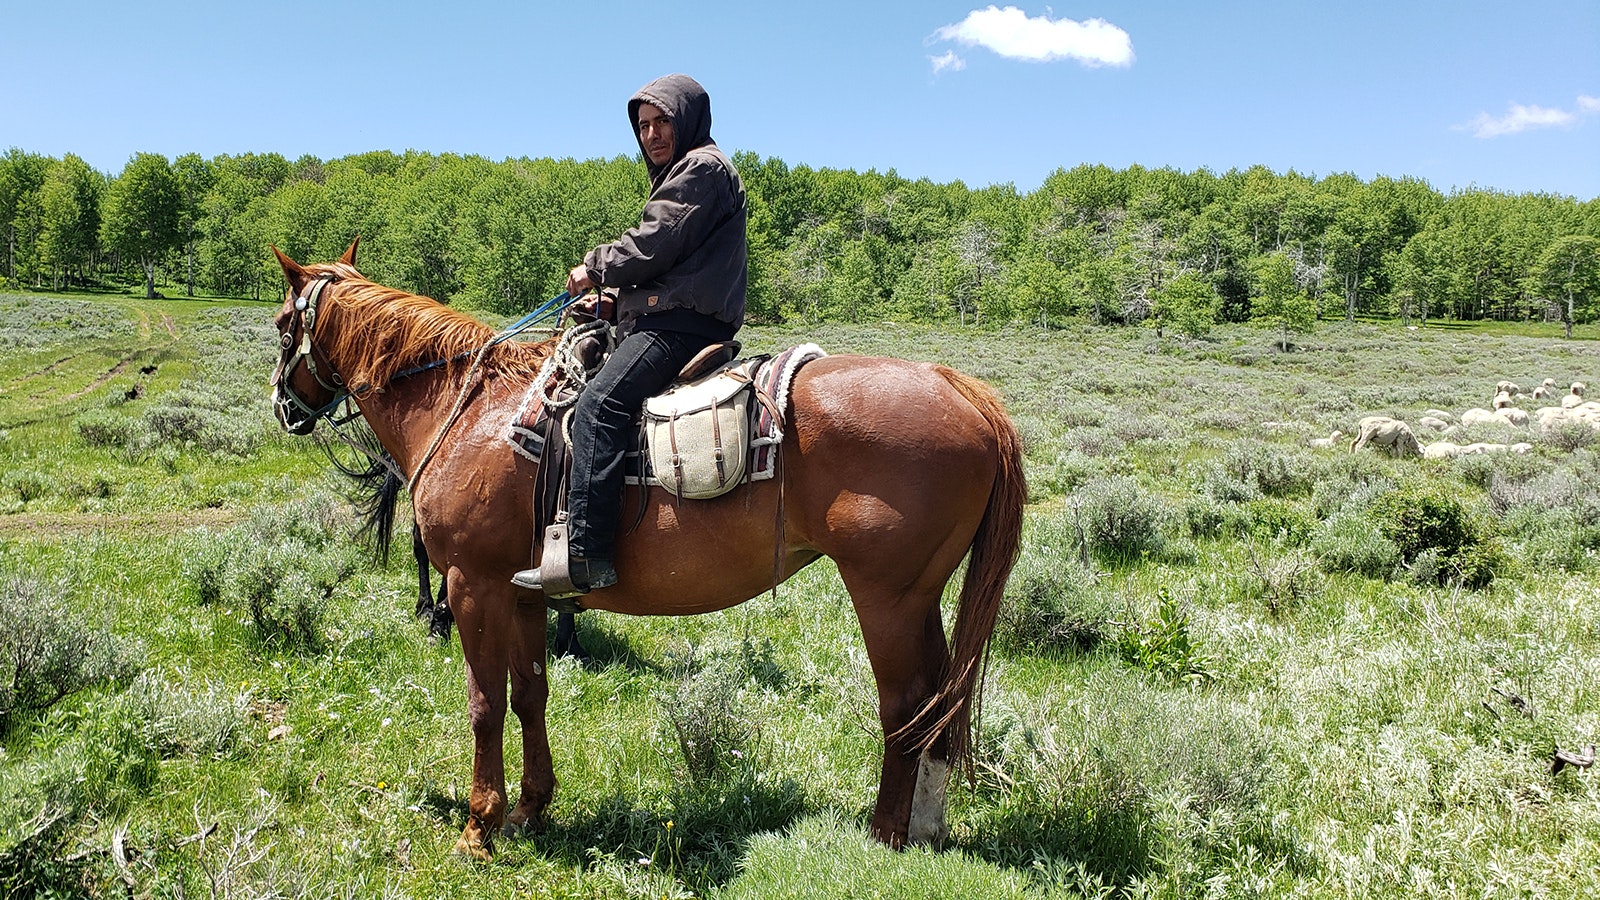 Sheepherders spend a lot of time on horseback following along behind the sheep that follow green forage all year long.